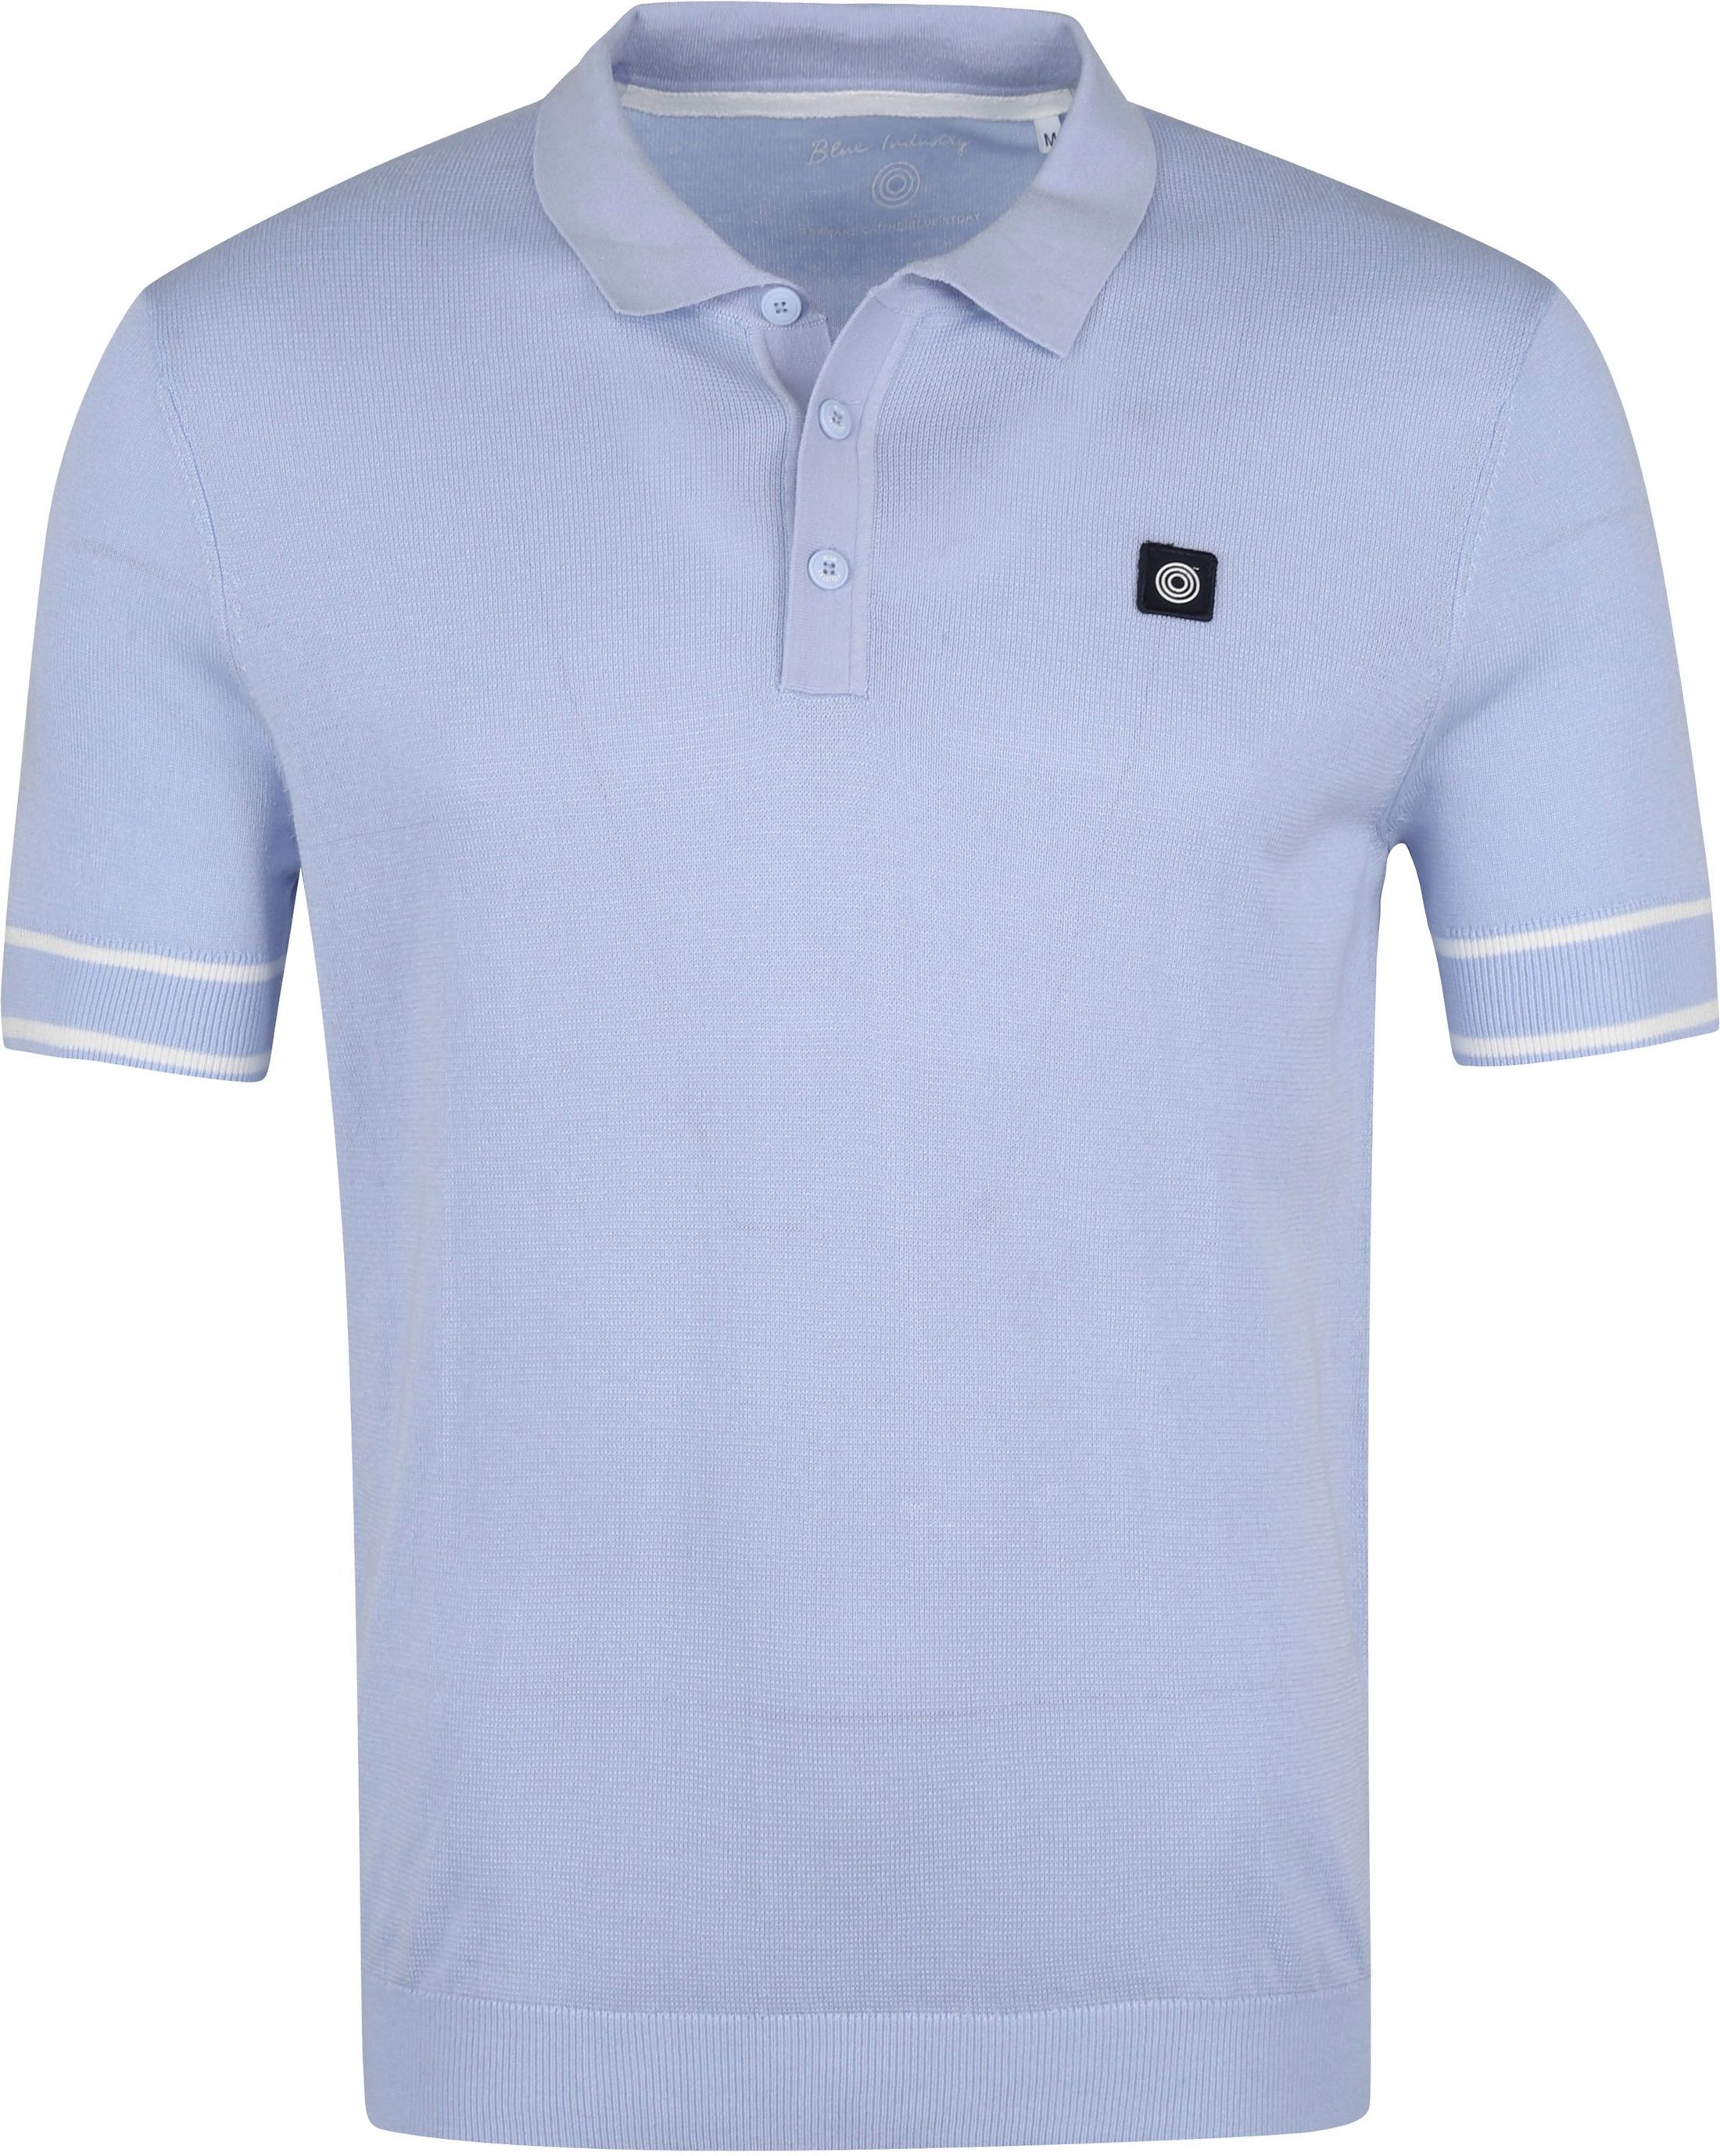 Industry Polo Shirt Light Blue size L